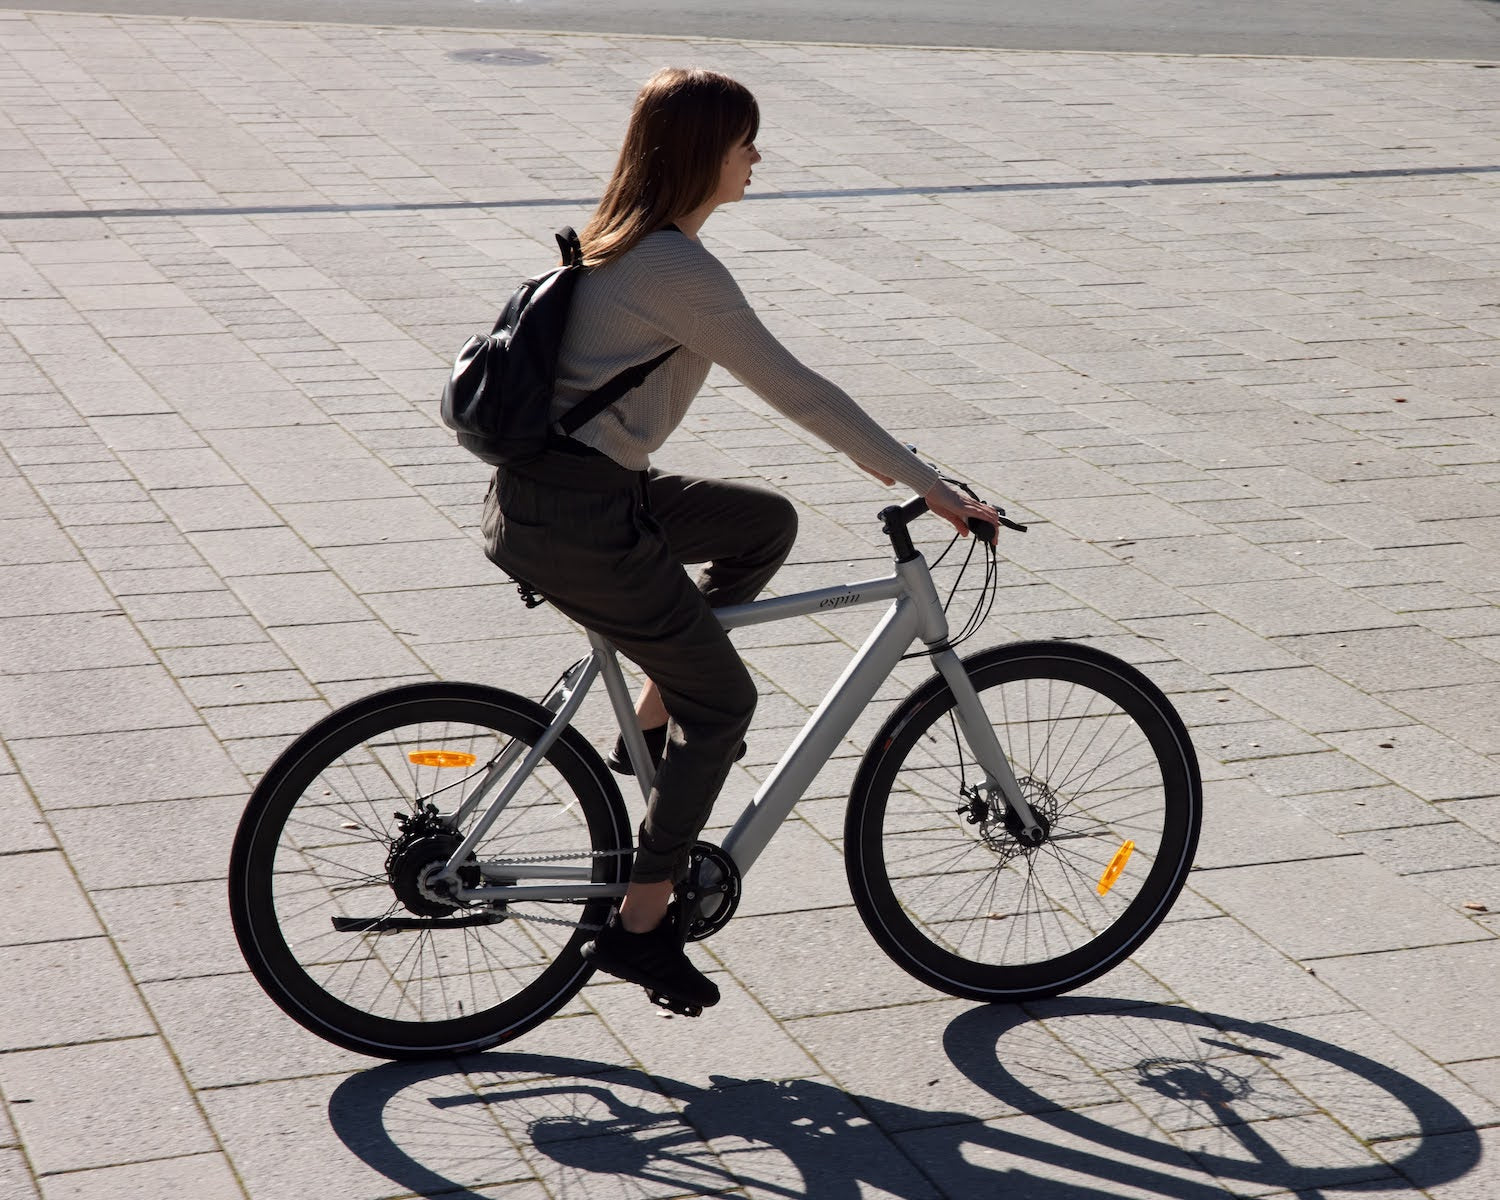 Are Espin E-Bikes Worth It? Here’s What People Have to Say